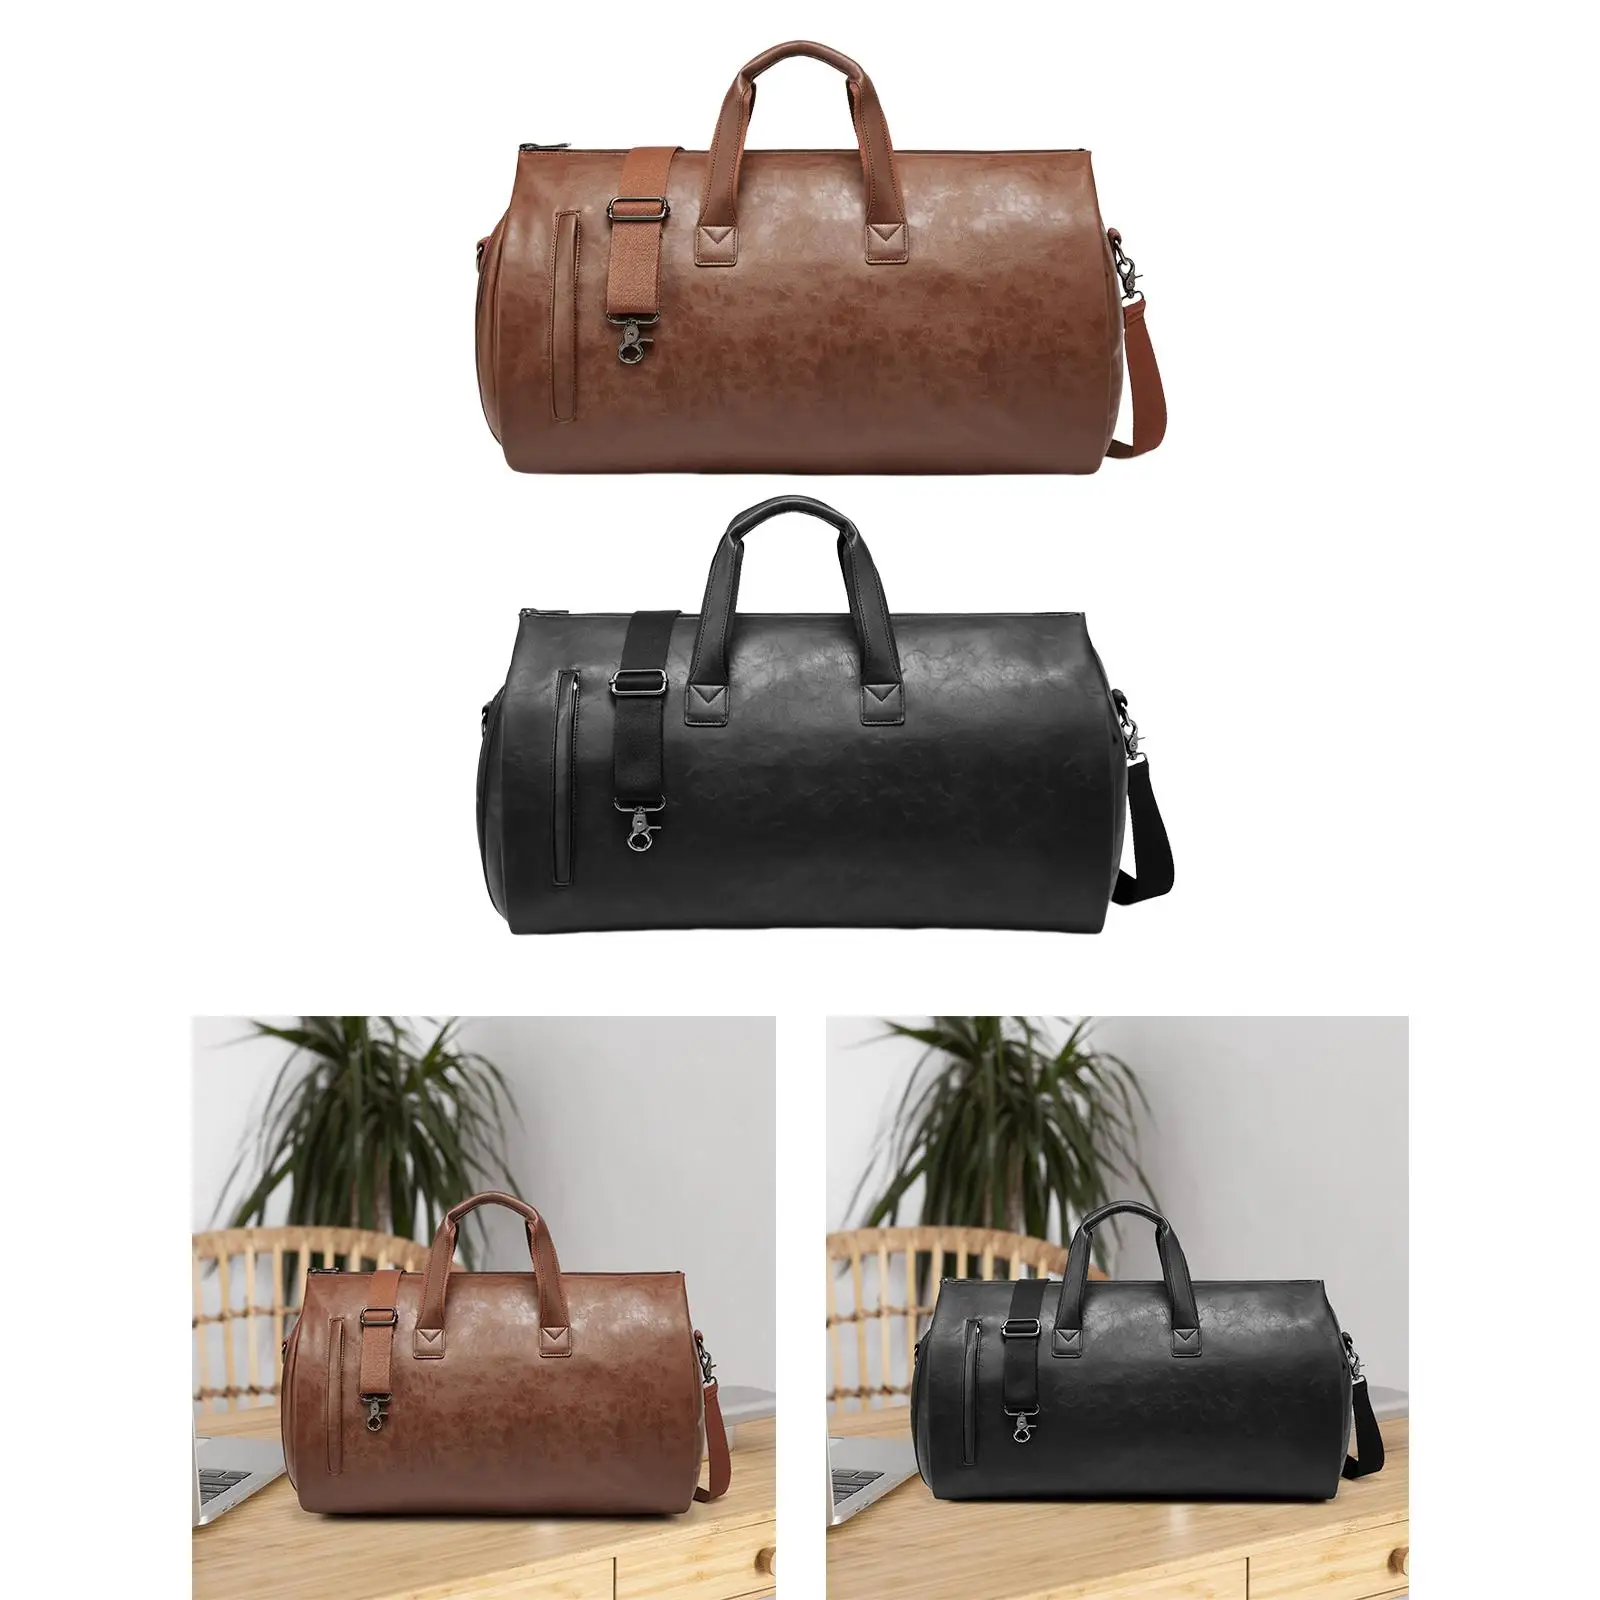 Leather Duffle Bag for Men Women Large Capacity Multipurpose Water Resistant Carry on Bag with Shoes Compartment for Camping